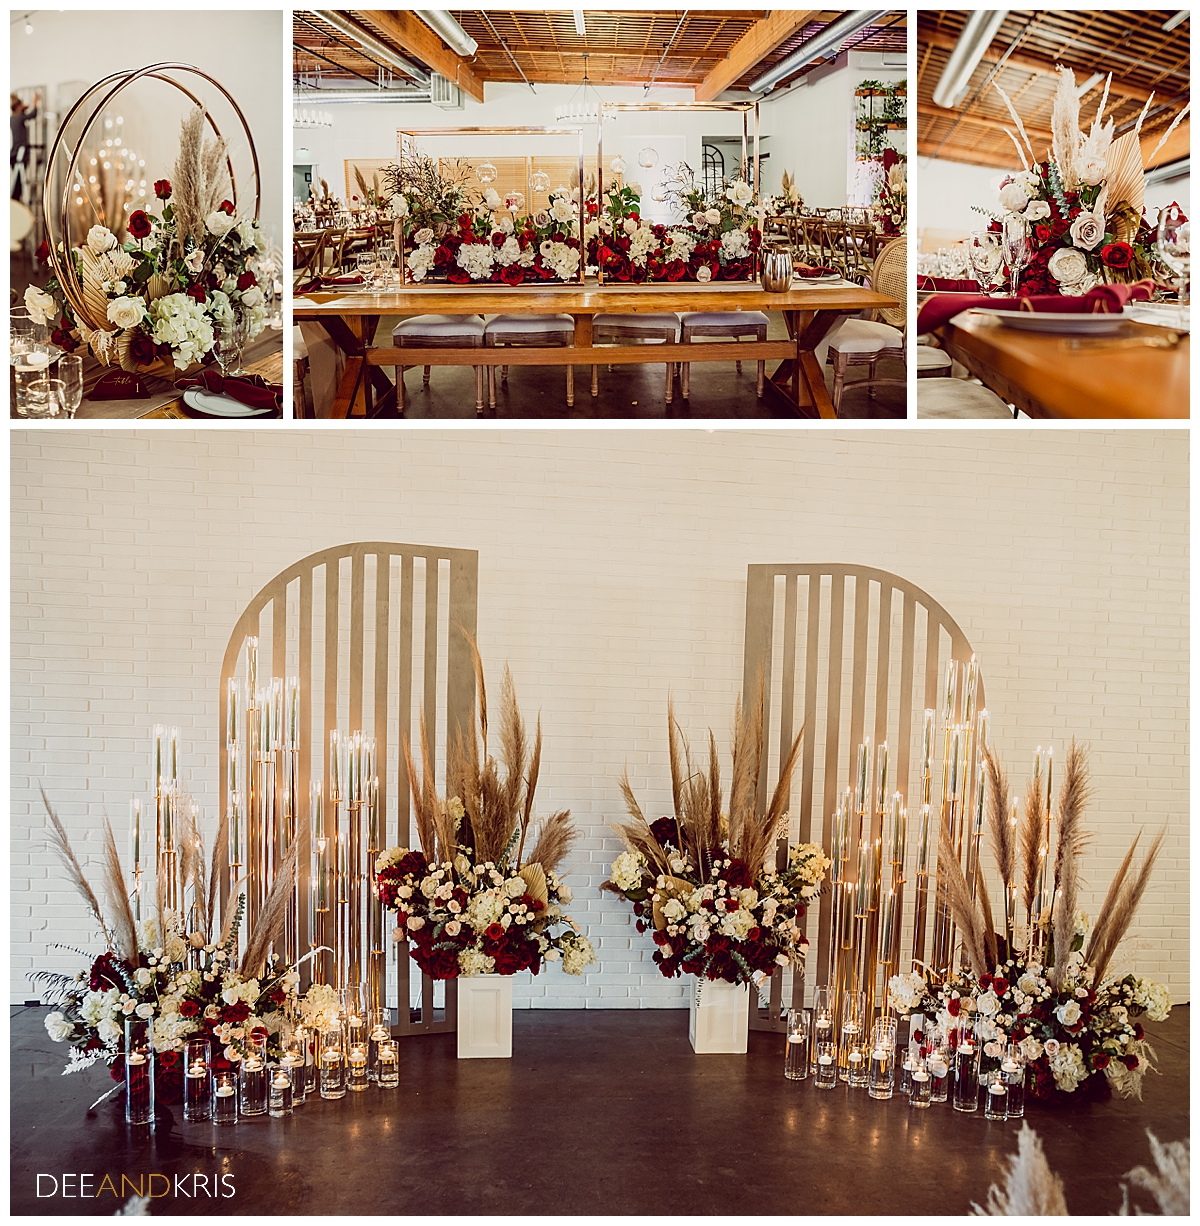 Four images: Tope left image of hoop and flower centerpiece. Top center image of tablescape with flowers and candles. Top right image of flower and dried grass centerpiece. Bottom image of wedding altar decorated with lights, flowers, and candles.